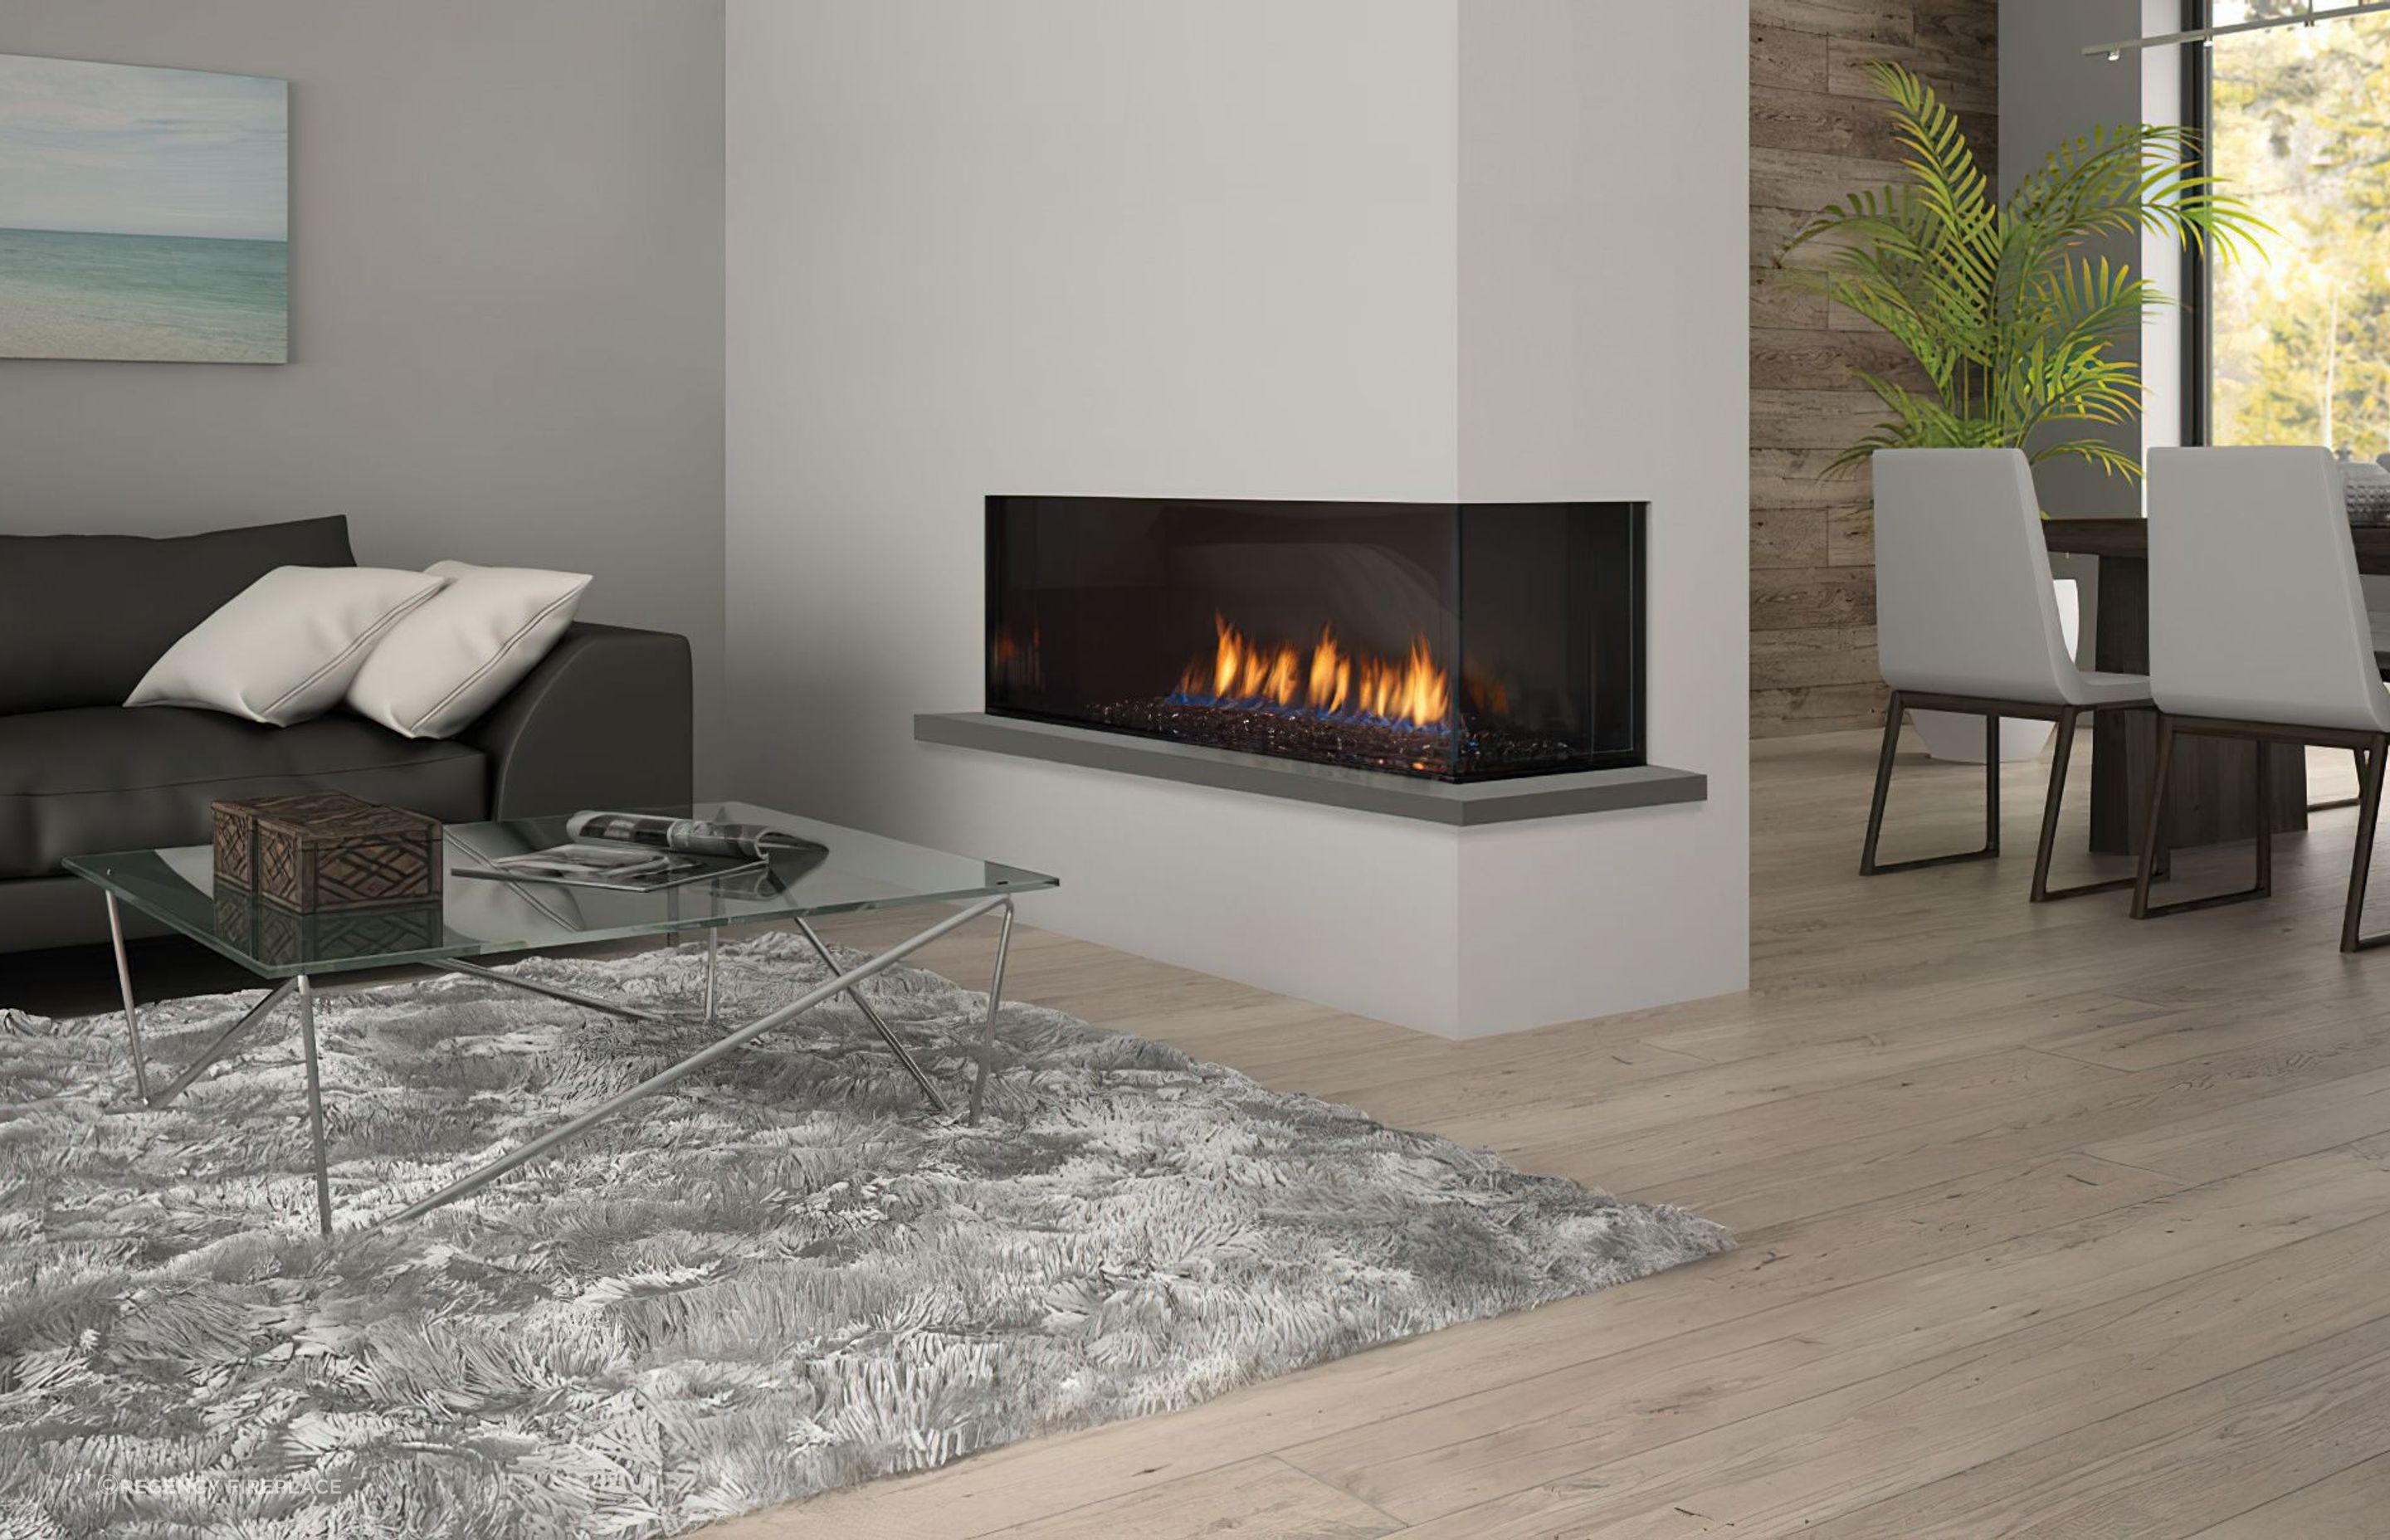 Featured product: Regency City Series Chicago Corner 40RE Gas Fireplace.